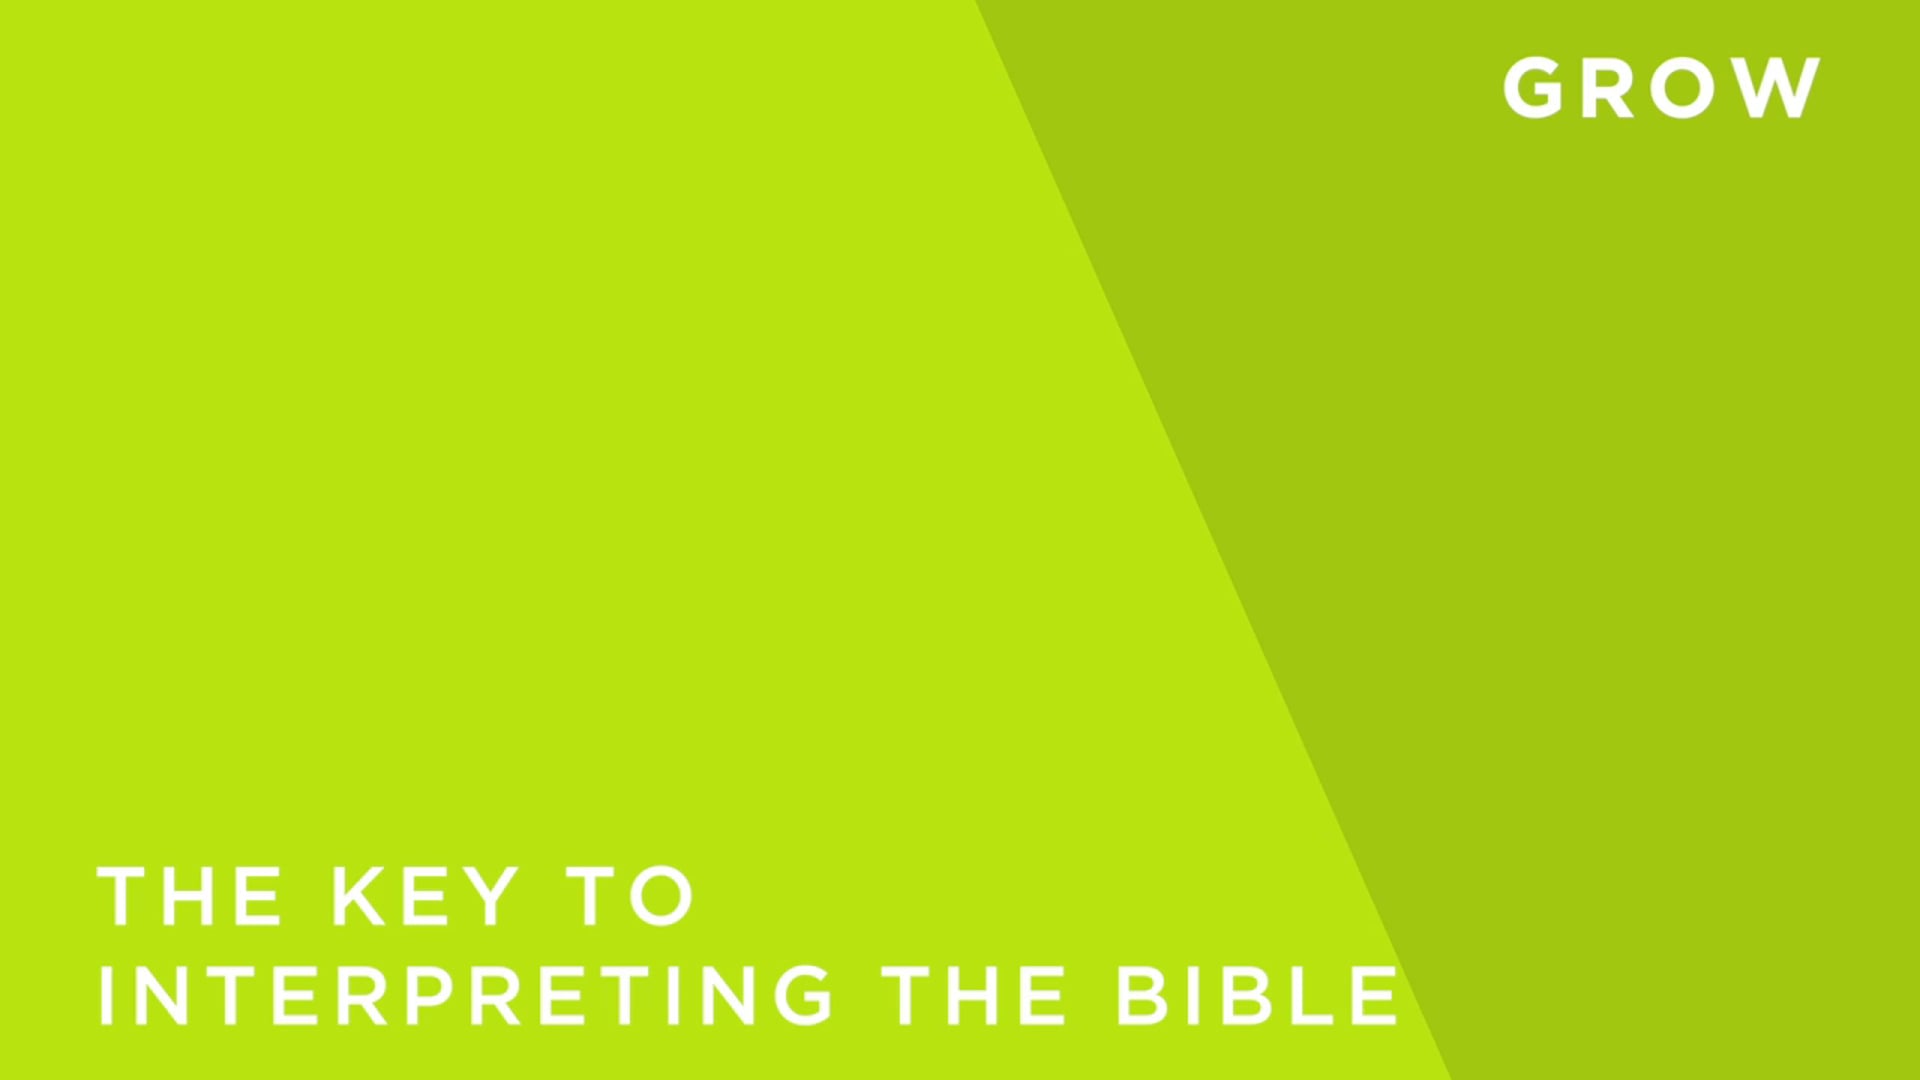 The Key to Interpreting the Bible